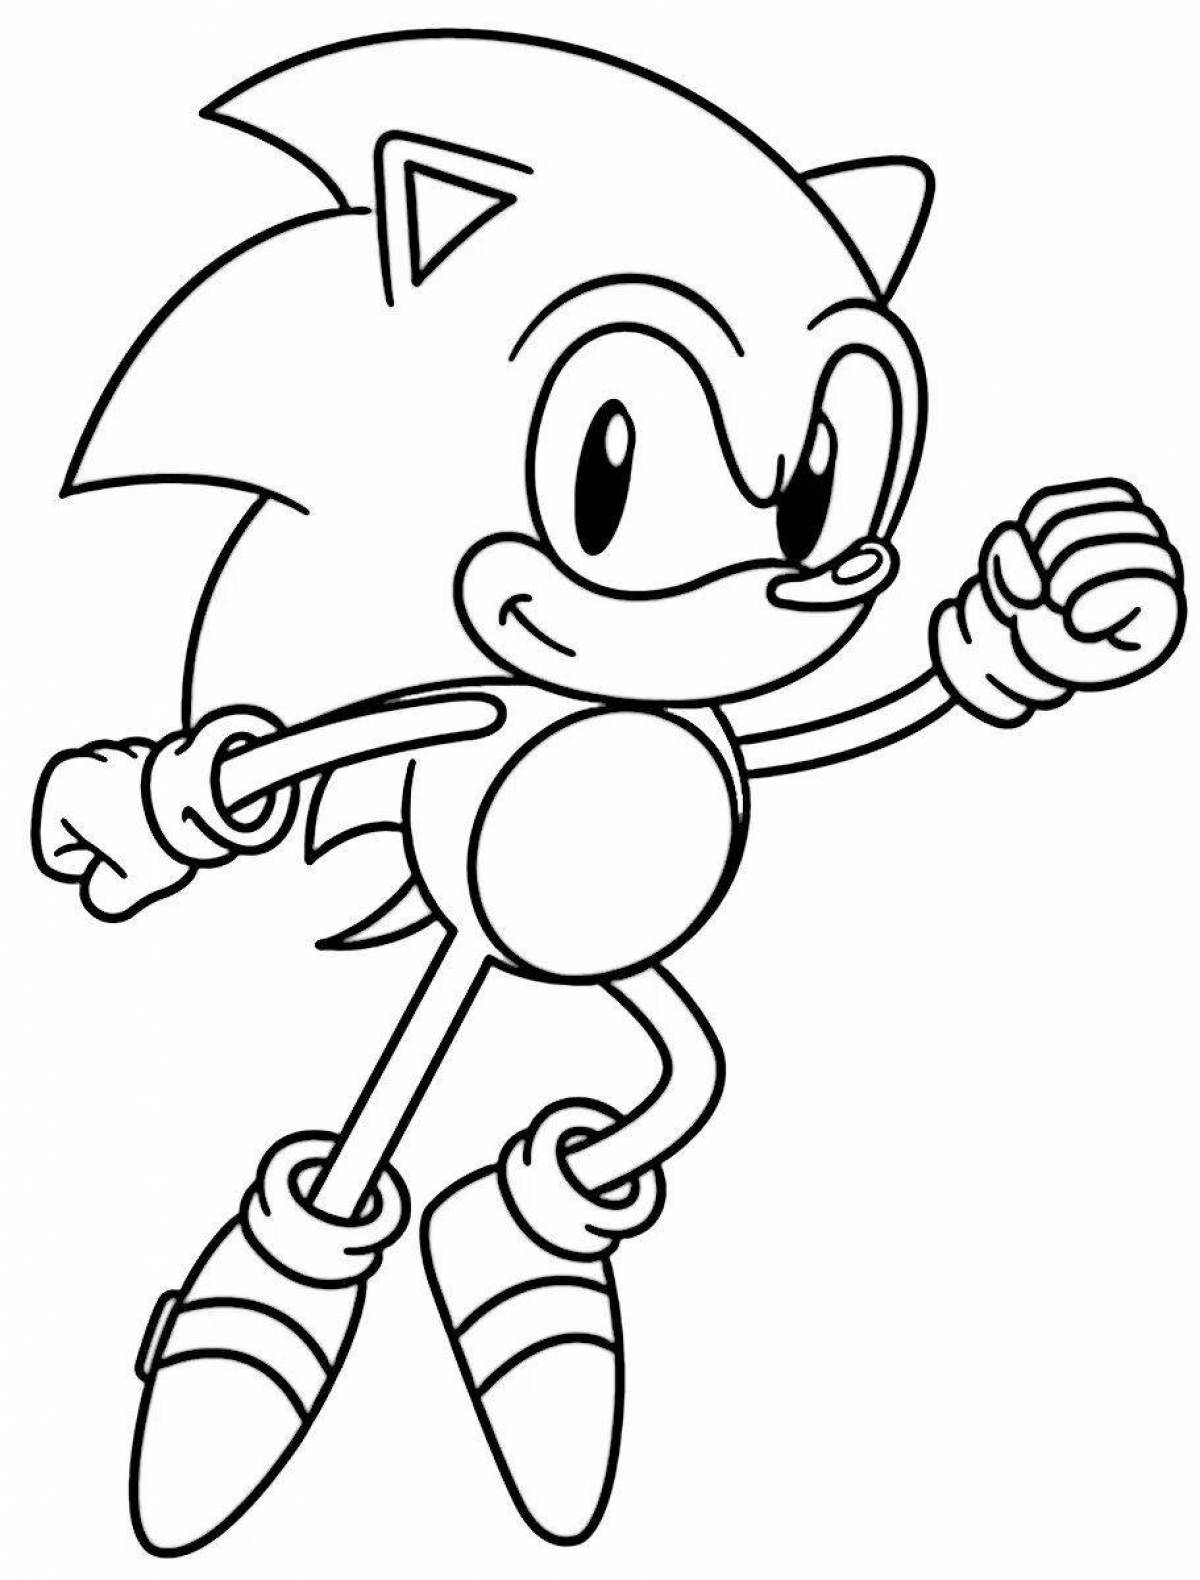 Charming sonic mania coloring book